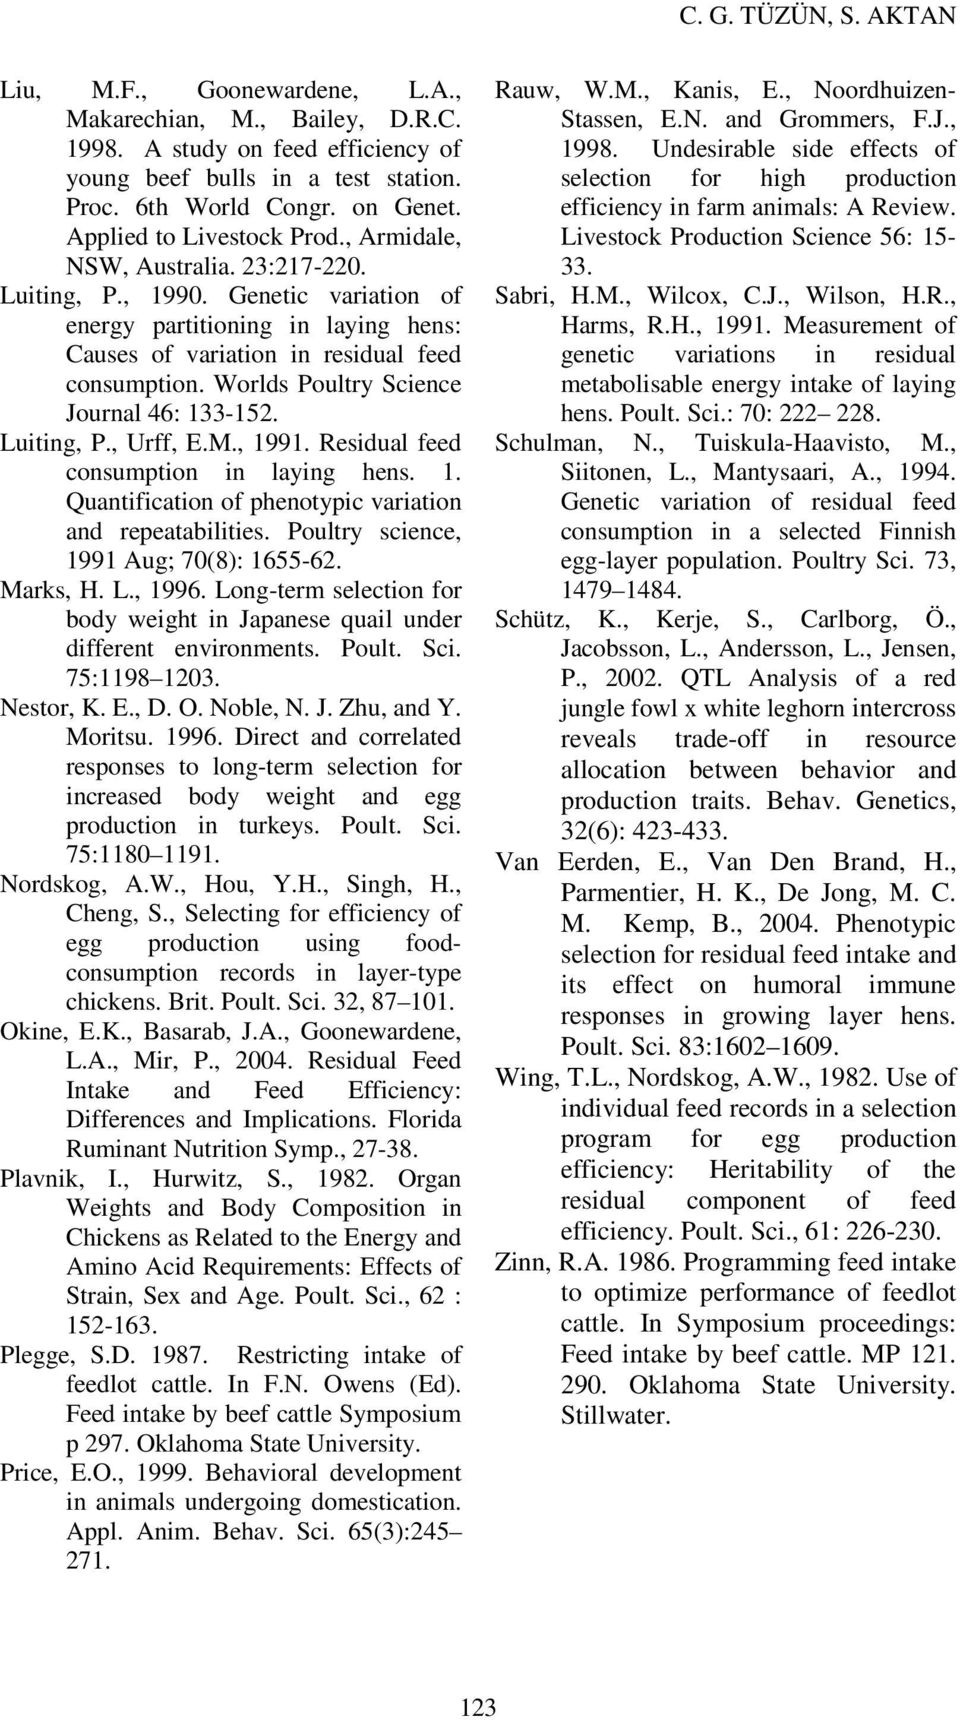 Worlds Poultry Science Journal 46: 133-152. Luiting, P., Urff, E.M., 1991. Residual feed consumption in laying hens. 1. Quantification of phenotypic variation and repeatabilities.